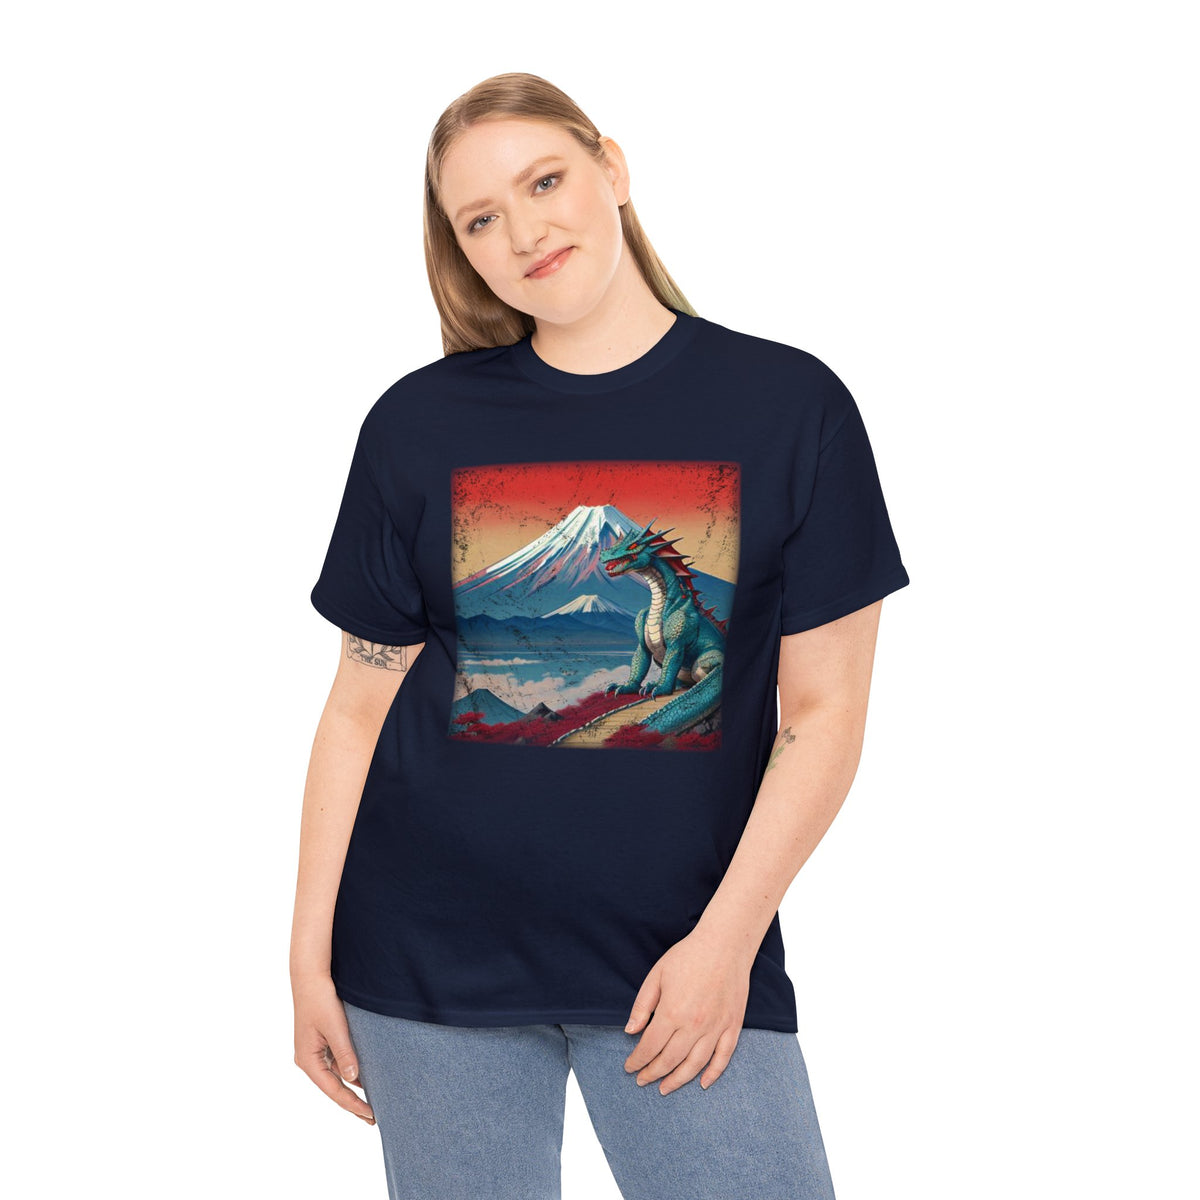 Unleash Your Inner Dragon With This Dragon T Shirt - Dragon by the Mountain - Shipping Included - WaterDragon Apparel